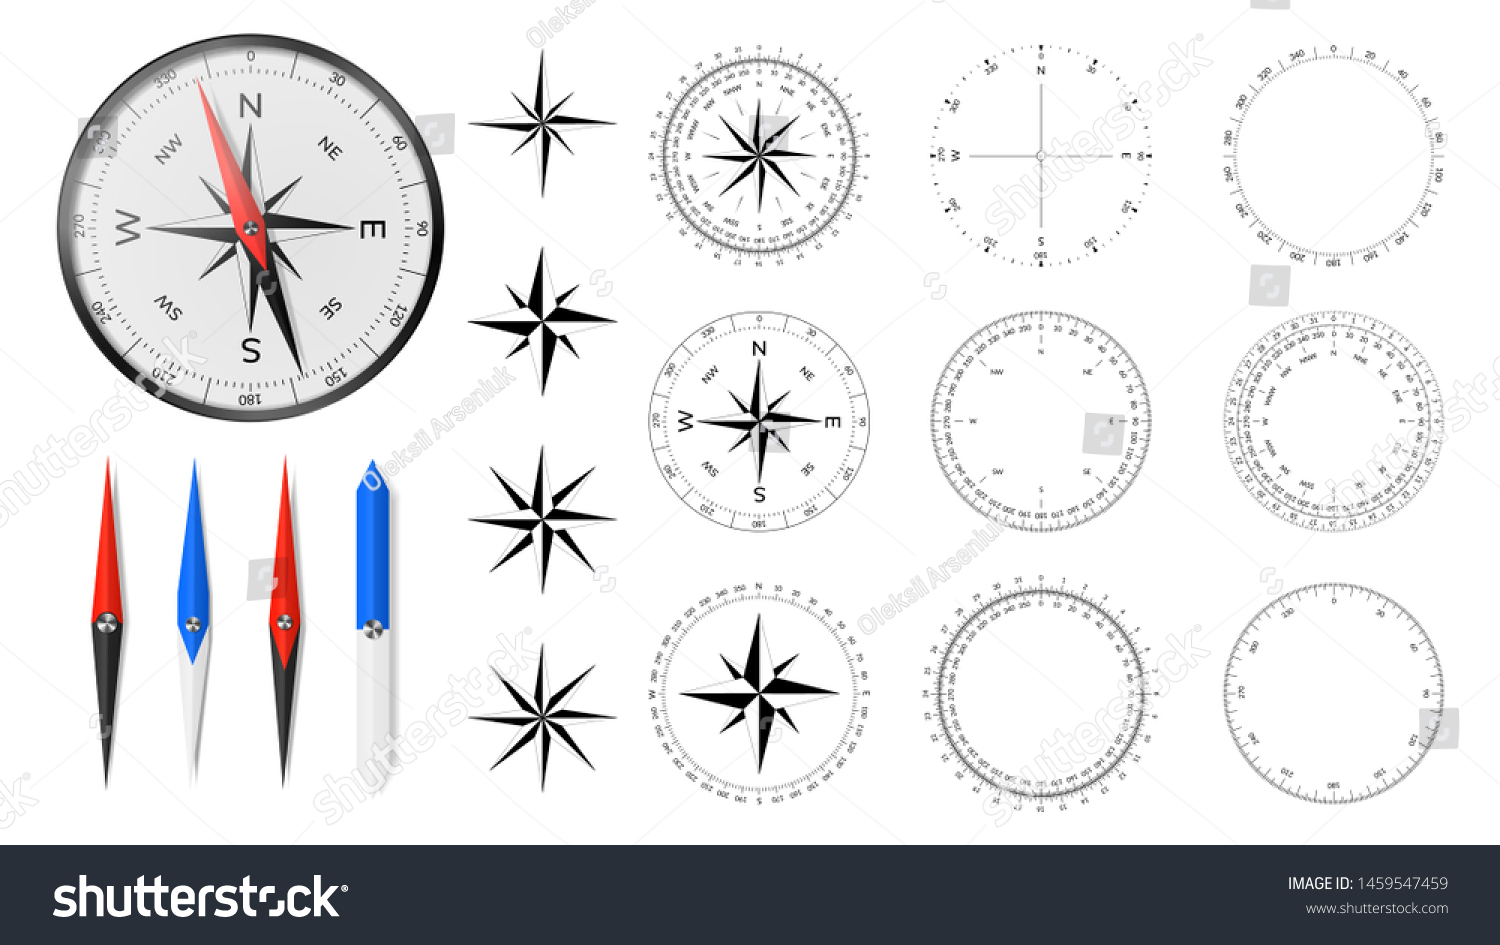 SVG of Navigational compass with set of additional dial faces, wind roses and directional needles svg